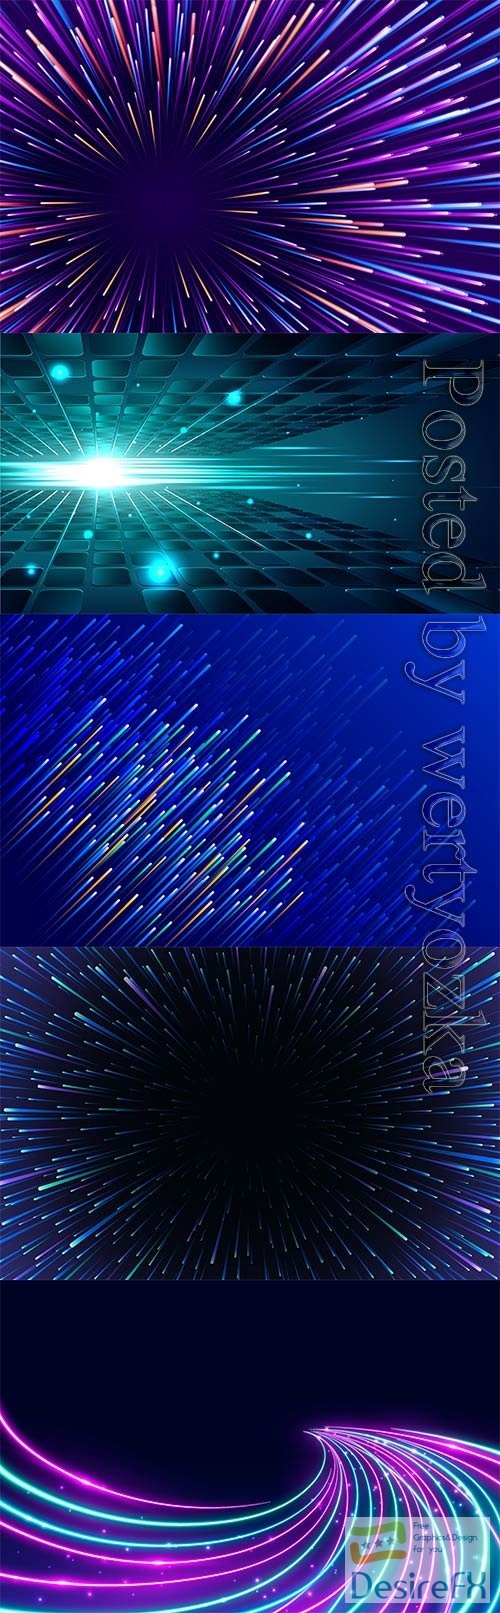 Abstract backgrounds with shining elements in vector